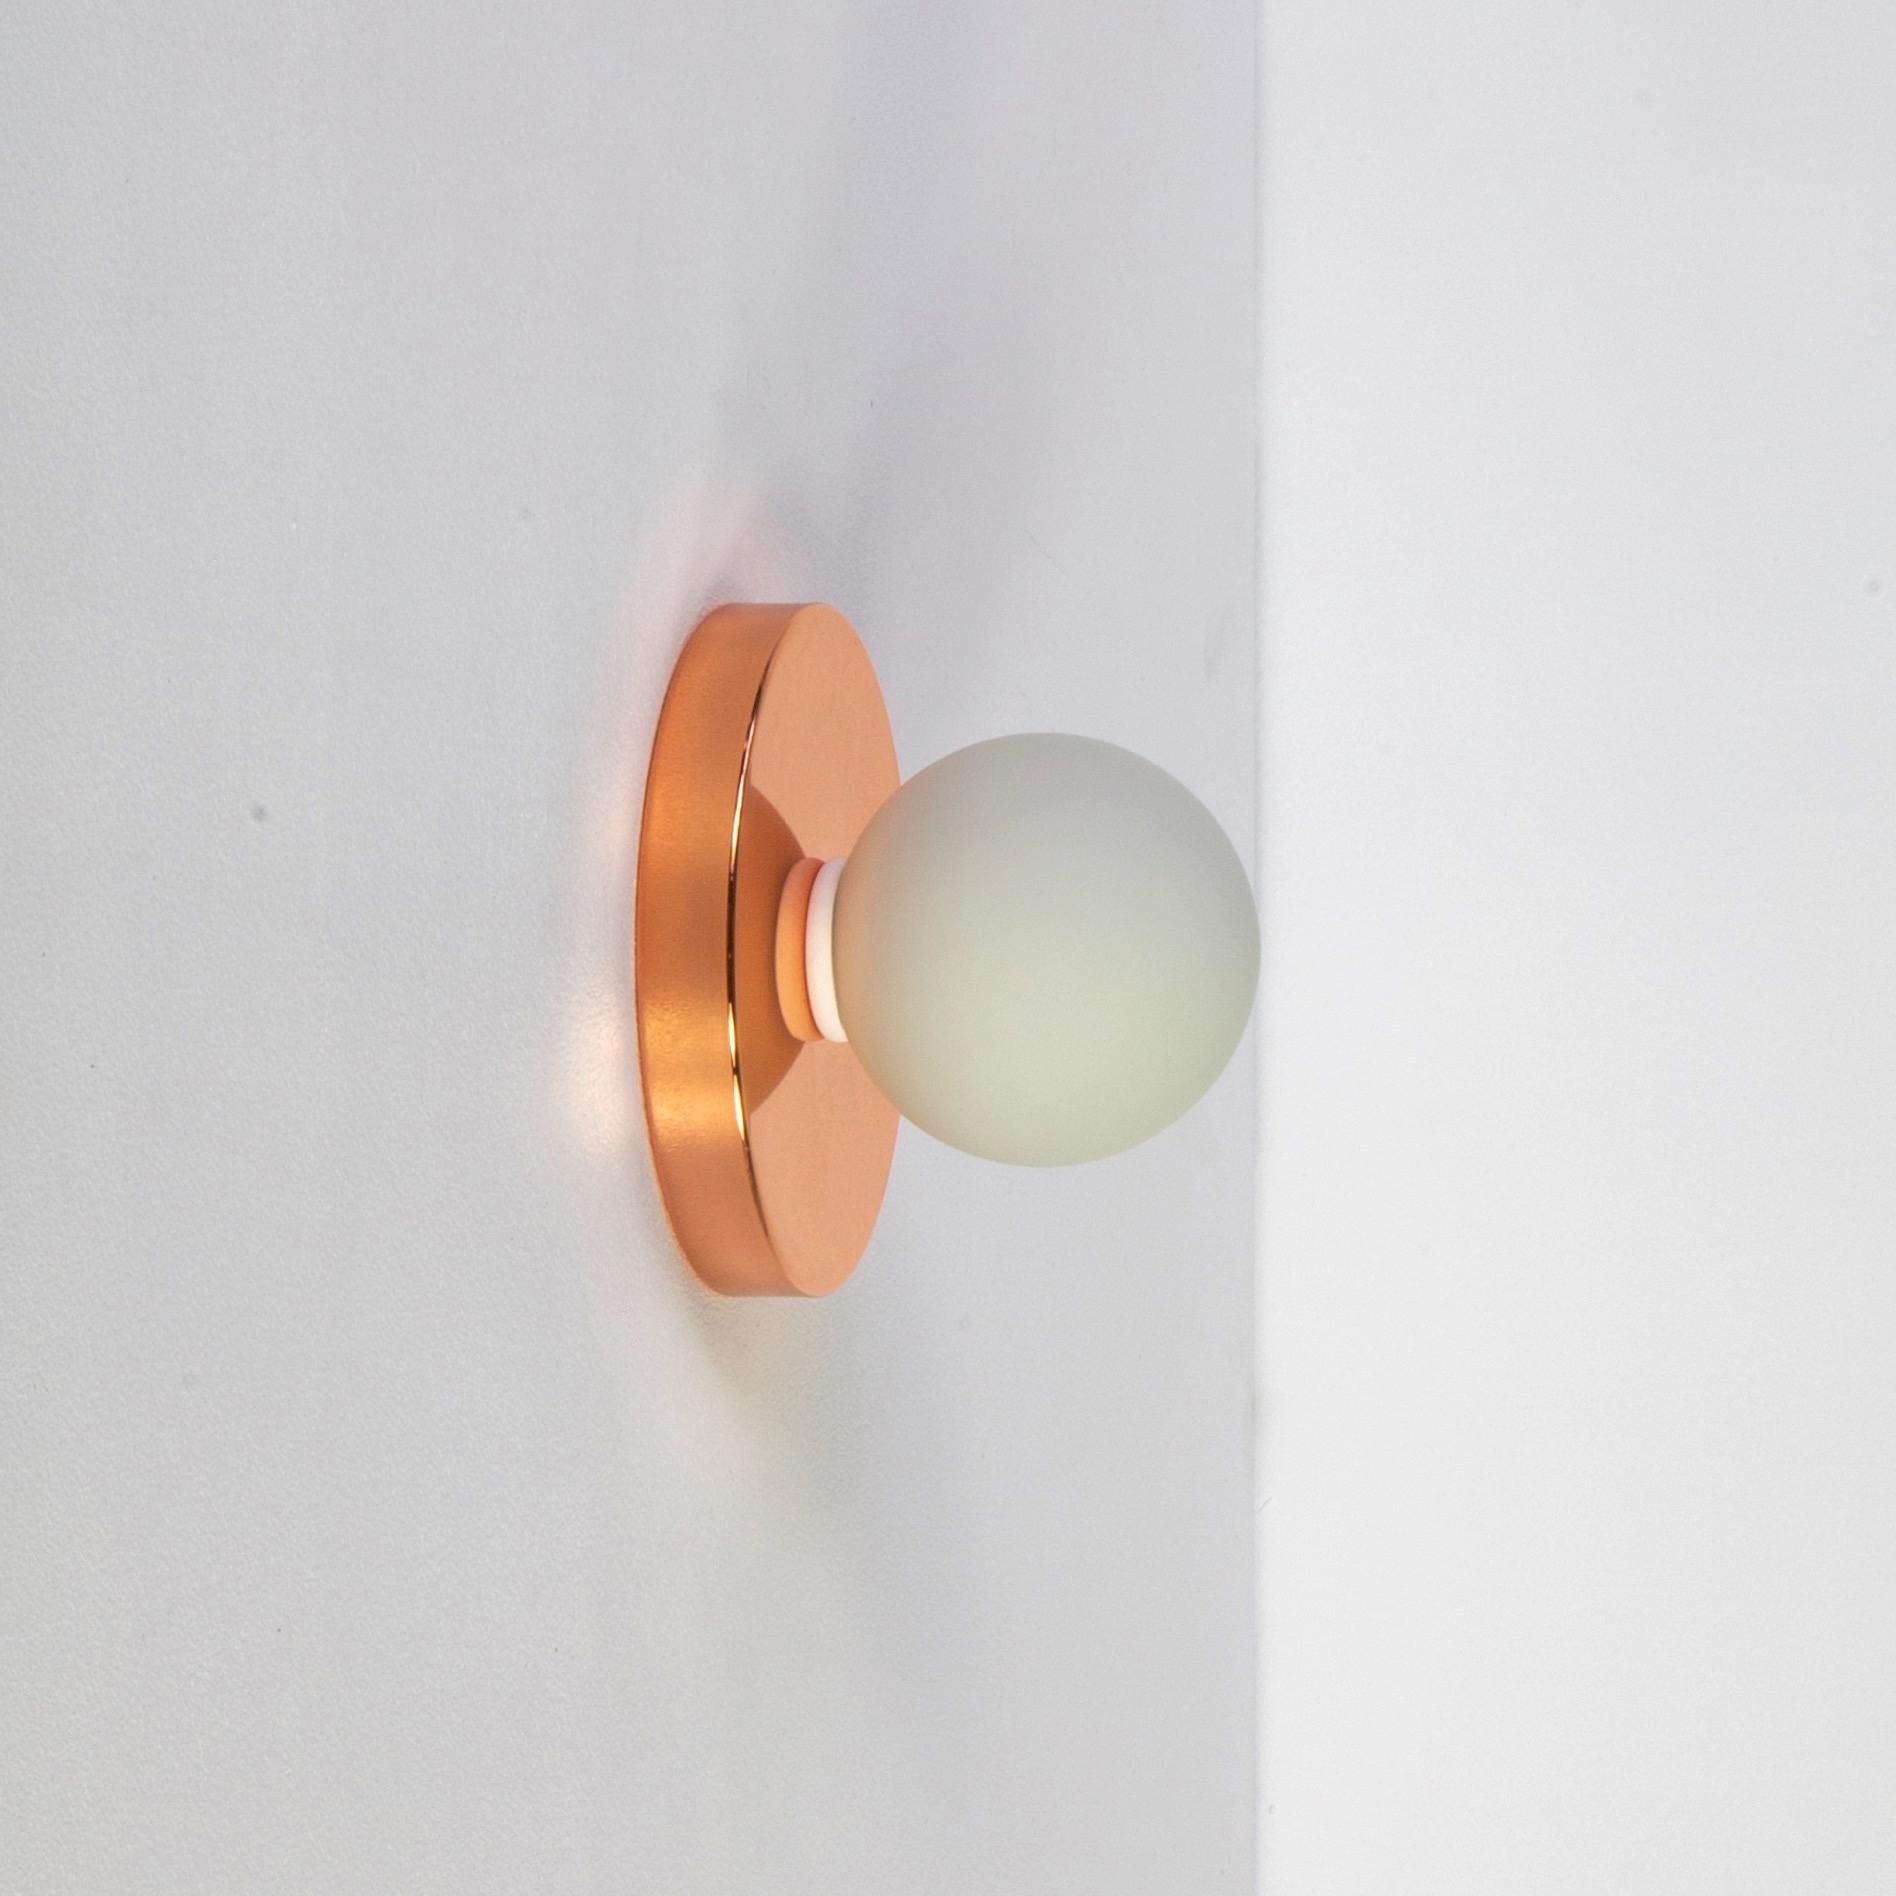 This listing is for 2x Globe Sconces in copper designed and manufactured by Research.Lighting.

Materials: Brass, Steel & Glass
Finish: Copper
Electronics: 1x G9 Socket, 1x 4.5 Watt LED Bulb (included), 450 Lumens
ADA Compliant. UL Listed. Made in